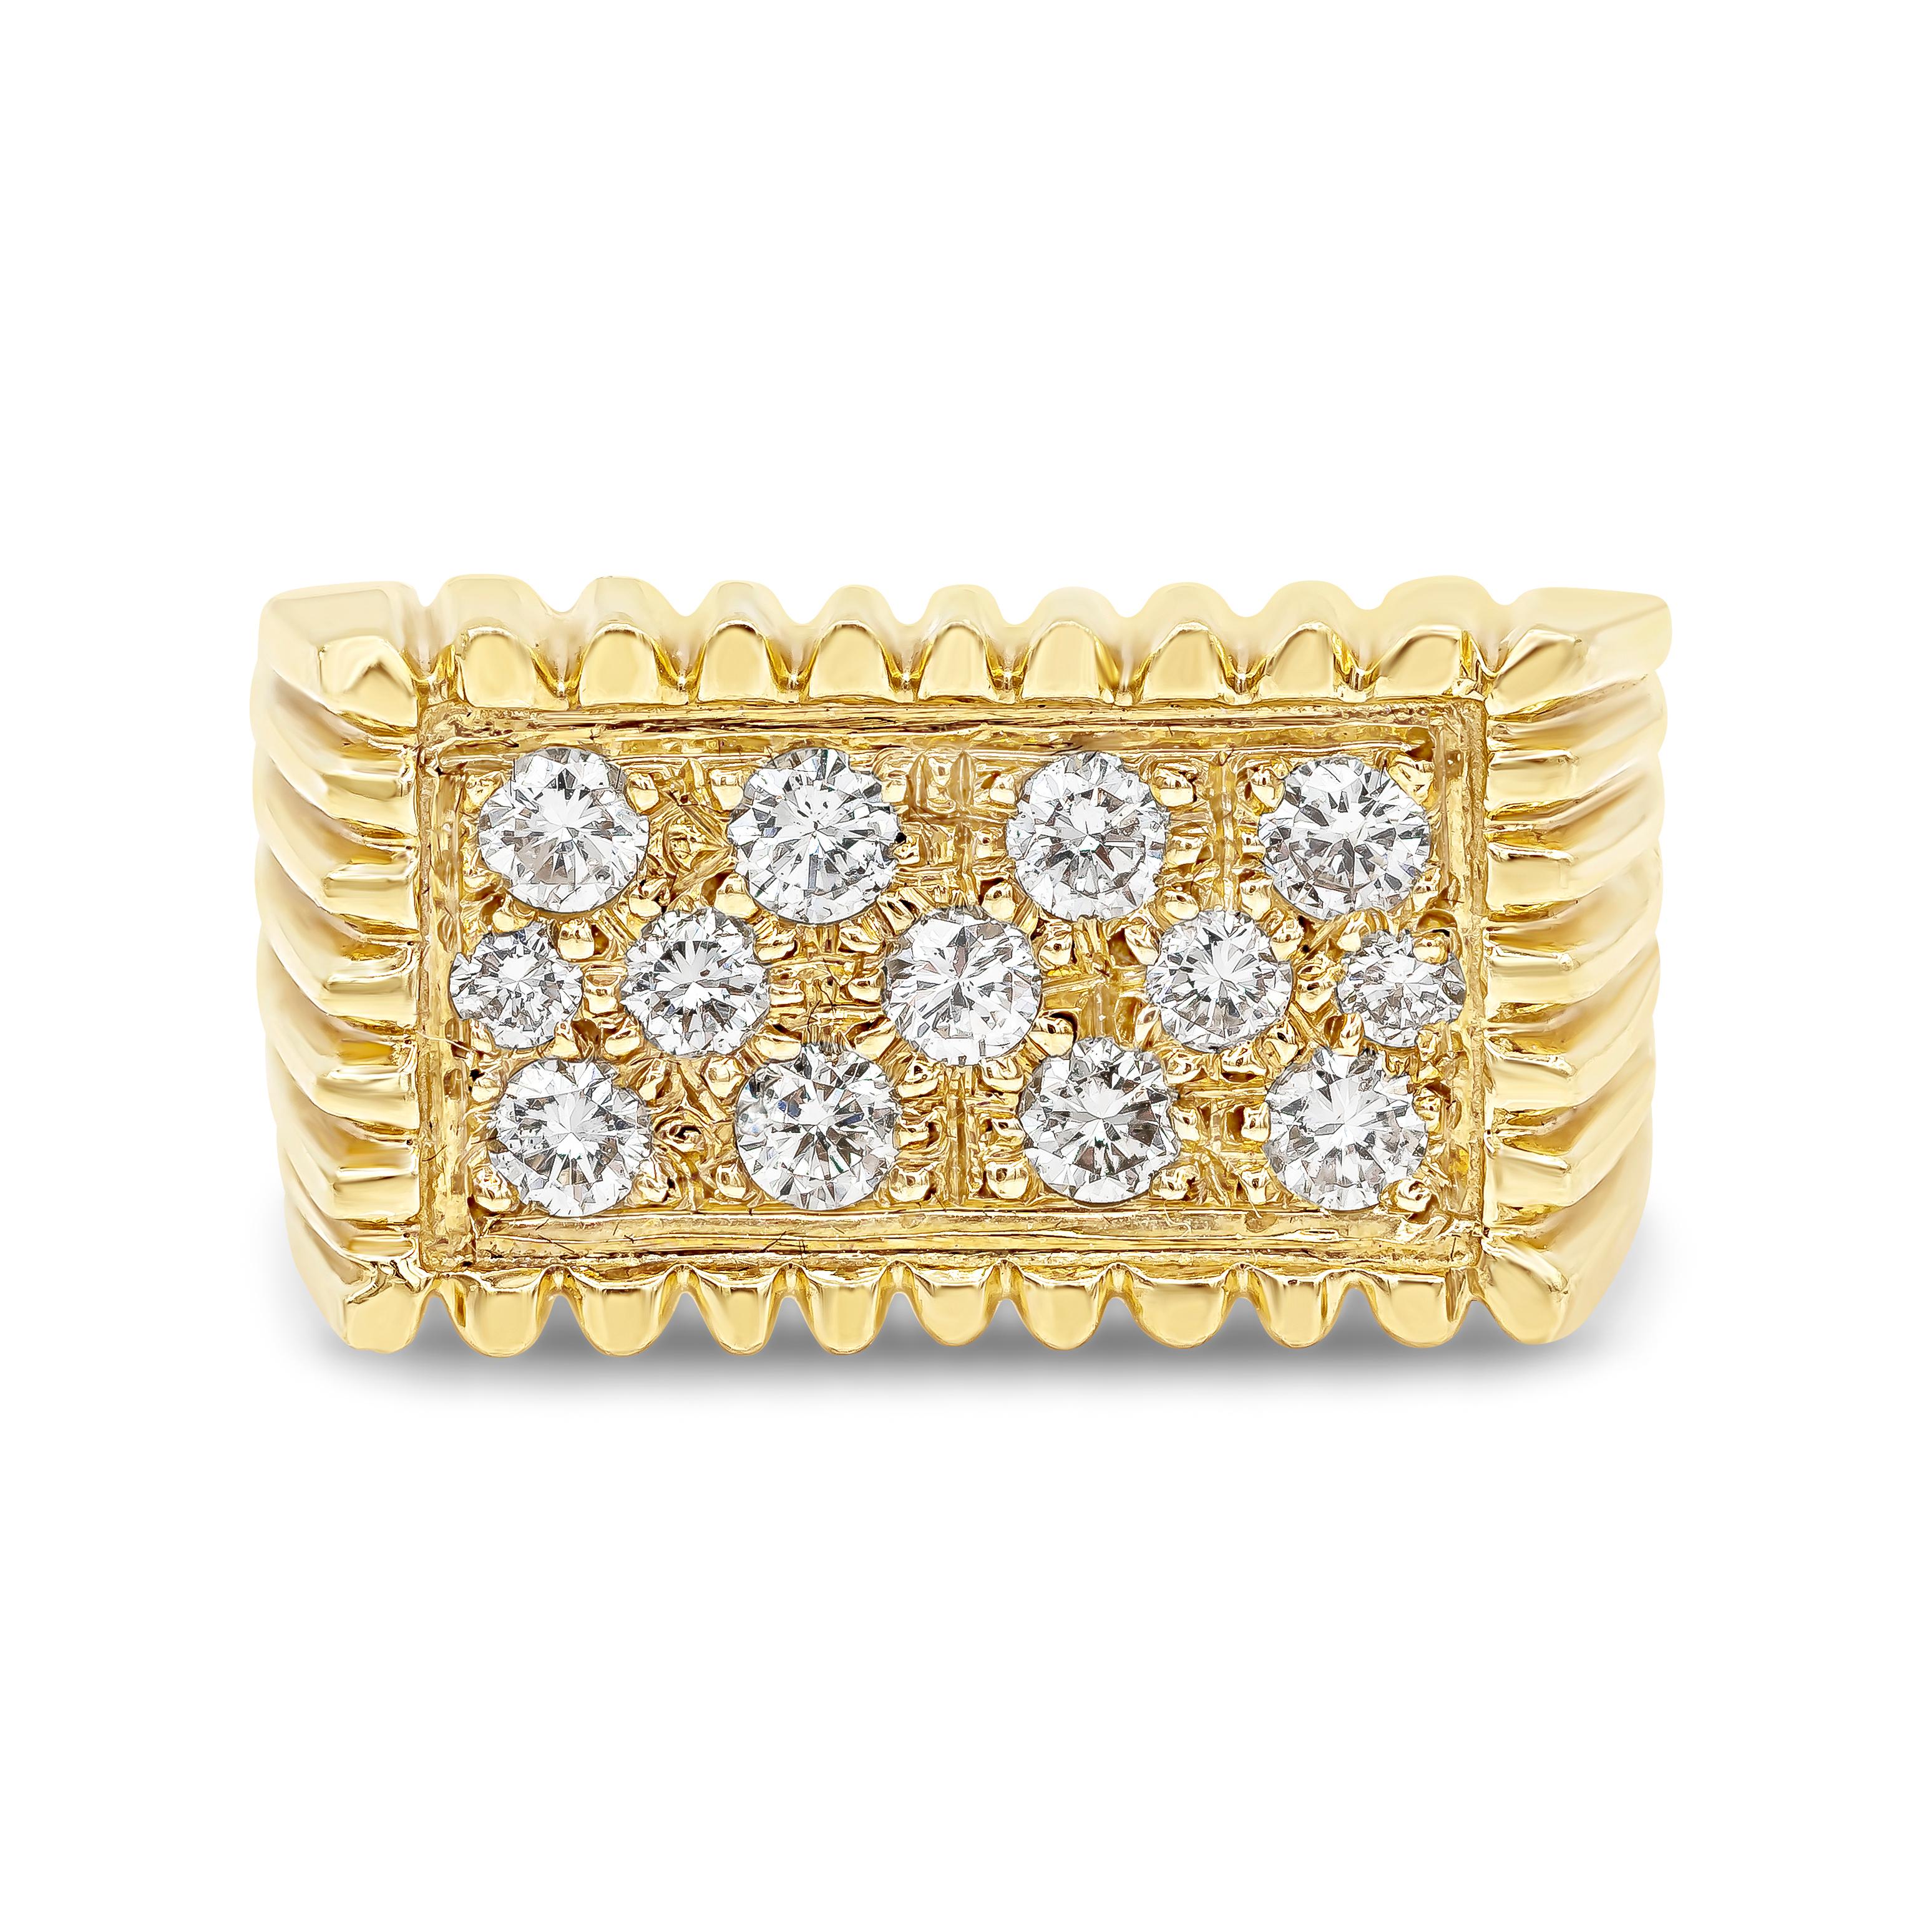 A chic men's fashion ring showcasing round brilliant diamonds, set in a flat 14K yellow gold mounting. Finished with bar edges to add to it's modern look. Diamonds weigh 1.02 carats total. Size 8.5 US resizable upon request.

Roman Malakov is a